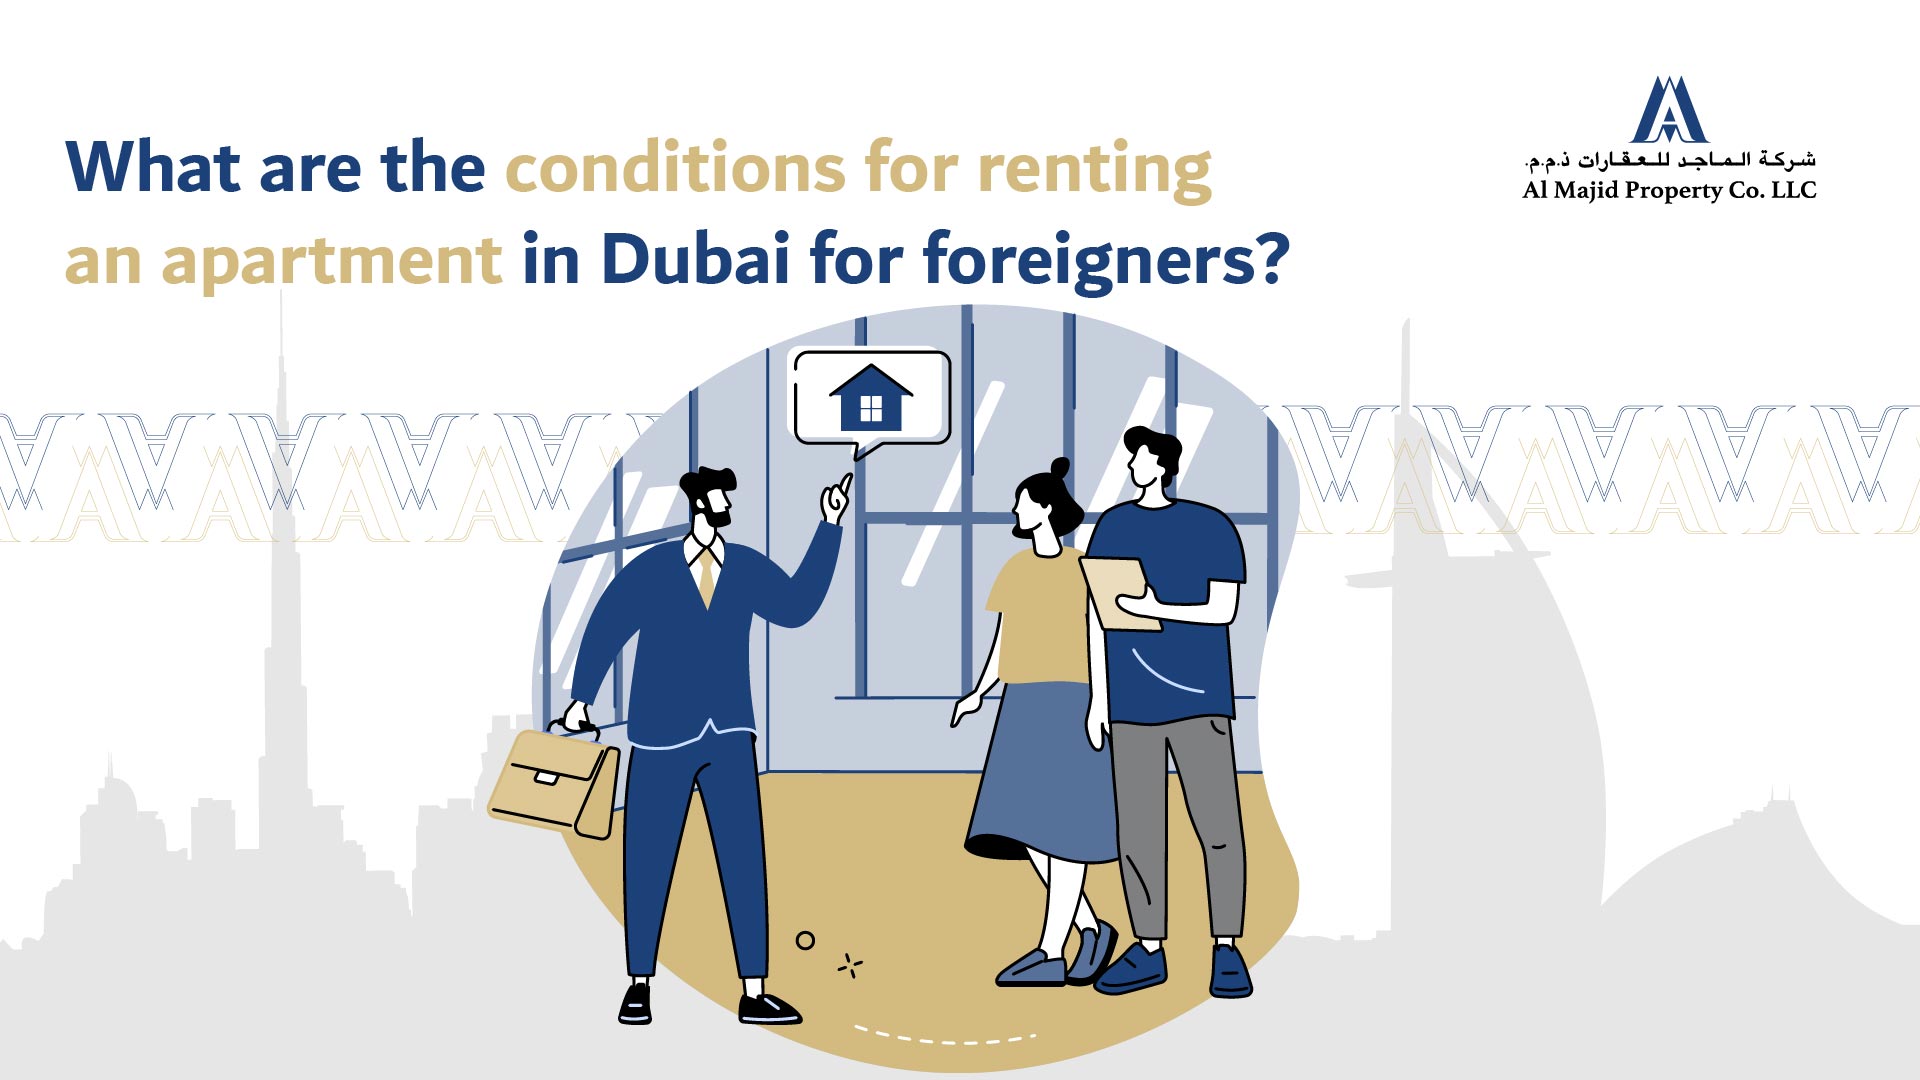 Conditions for renting an apartment in Dubai for foreigners